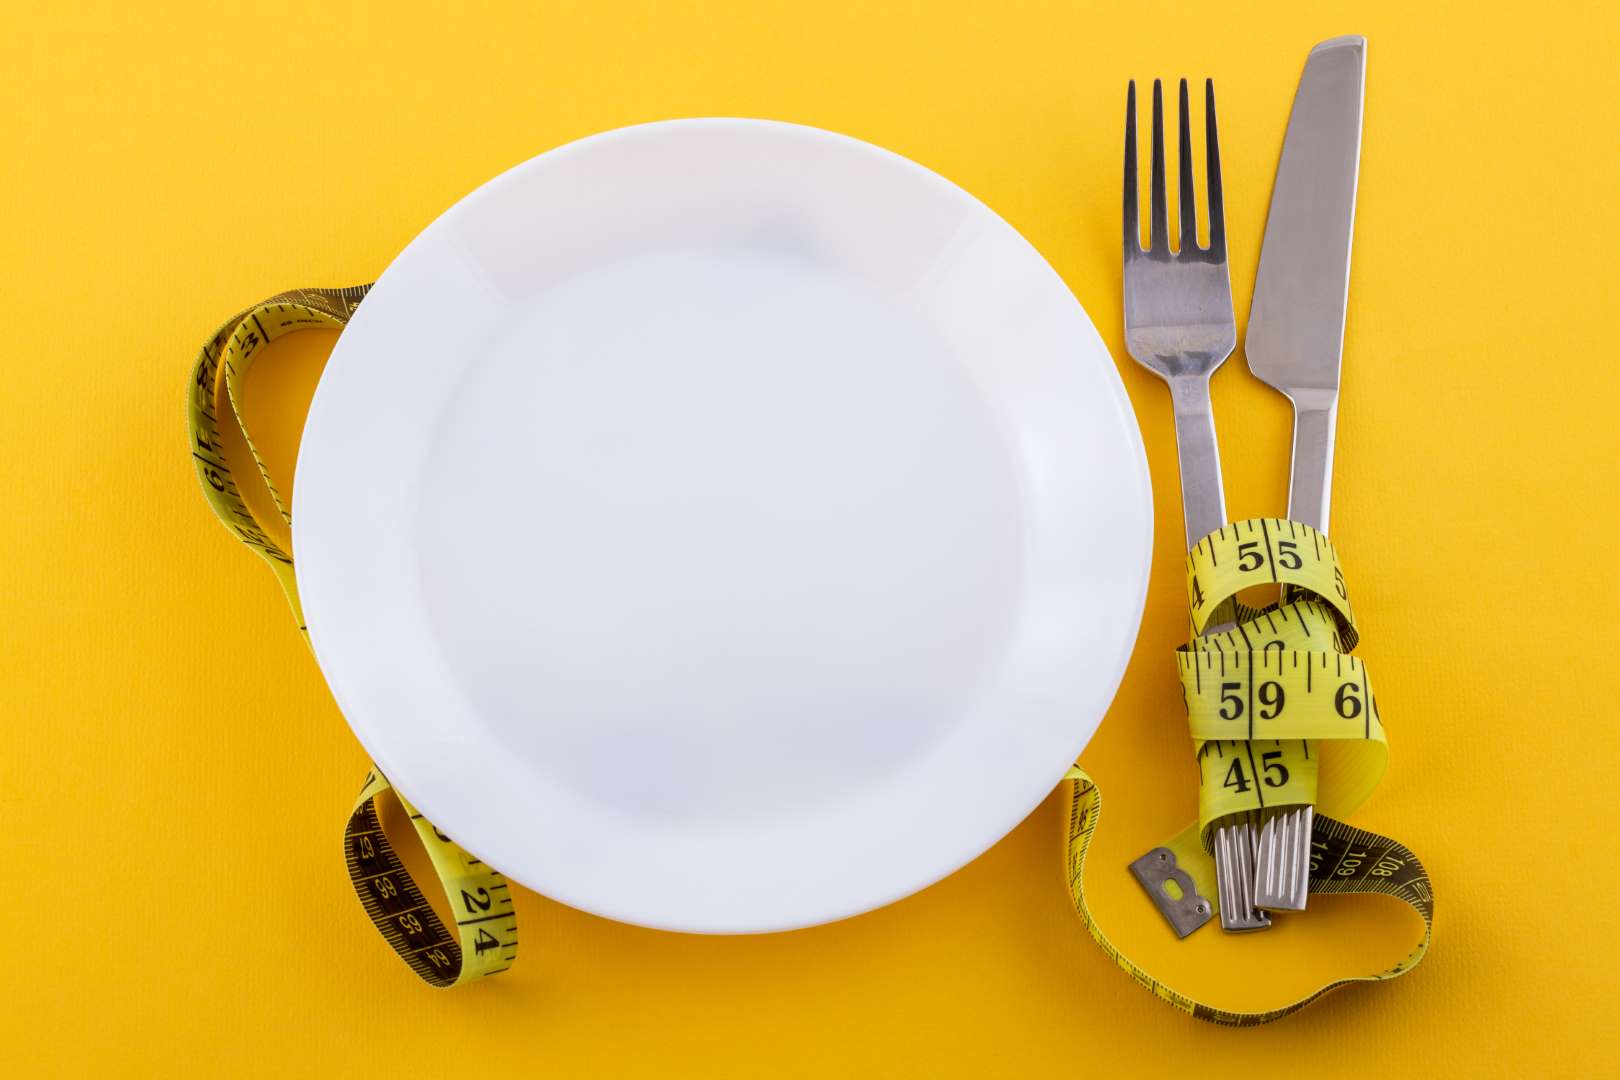 Cutlery and a white plate with measuring tape on a yellow background